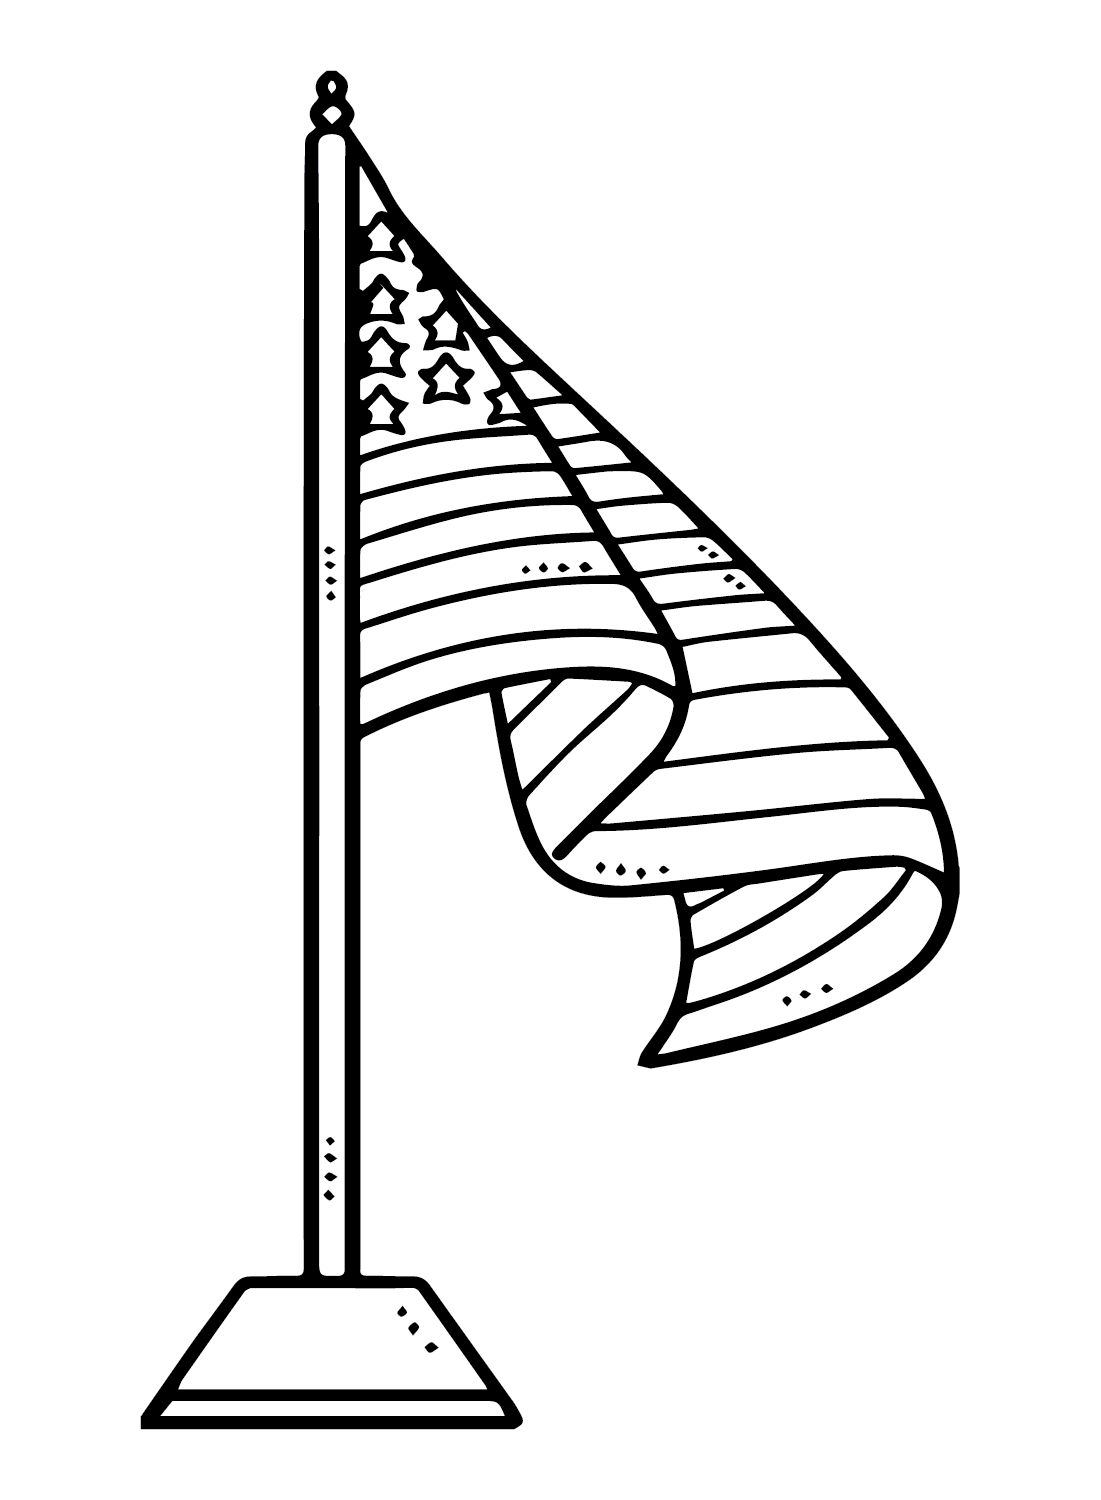 American Flag Images Coloring Page - Free Printable Coloring Pages